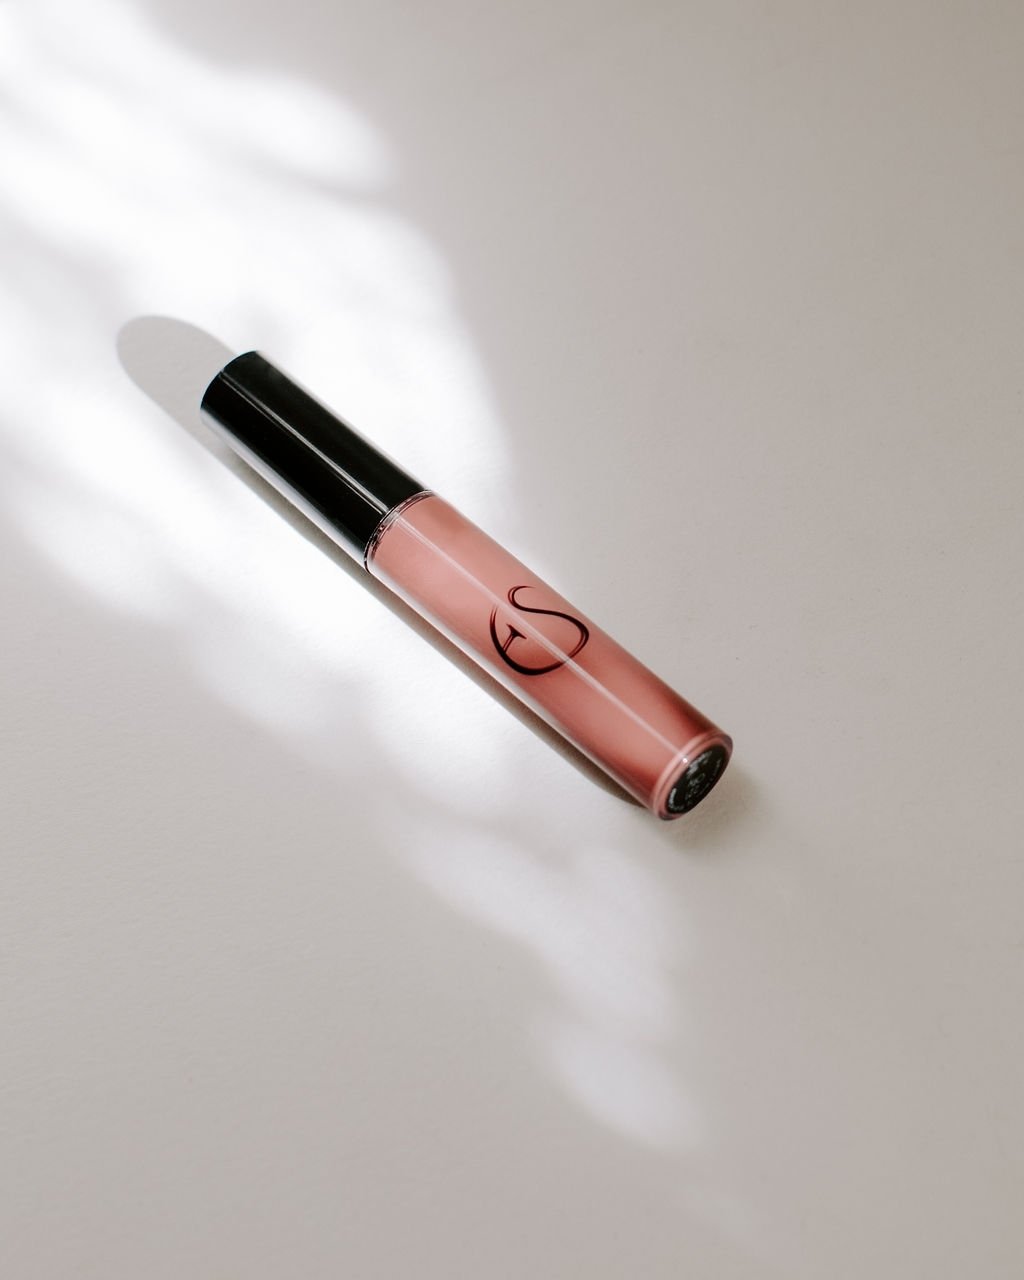 OLLY! Some people are gloss fans and some are more into lipstick. So we created both, our newest shade to achieve the perfect natural lip color. Hydration and a touch of neutral rose/beige. It looks like your lips, just better! You can add this on to